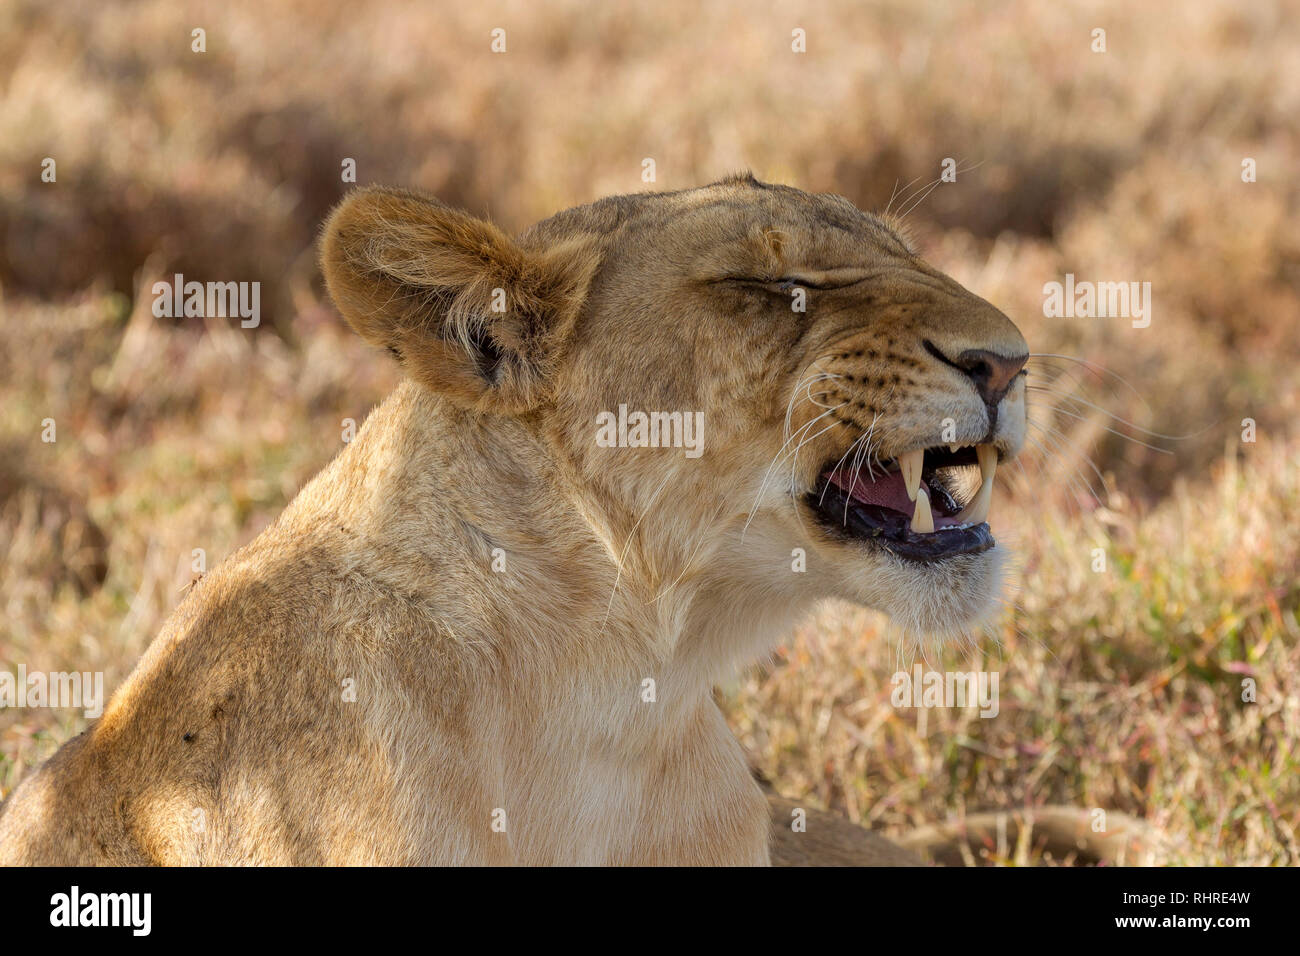 A single female lion in the shade during the day, sitting up and starting to yawn, Lewa Conservancy, Lewa, Kenya, Africa Stock Photo